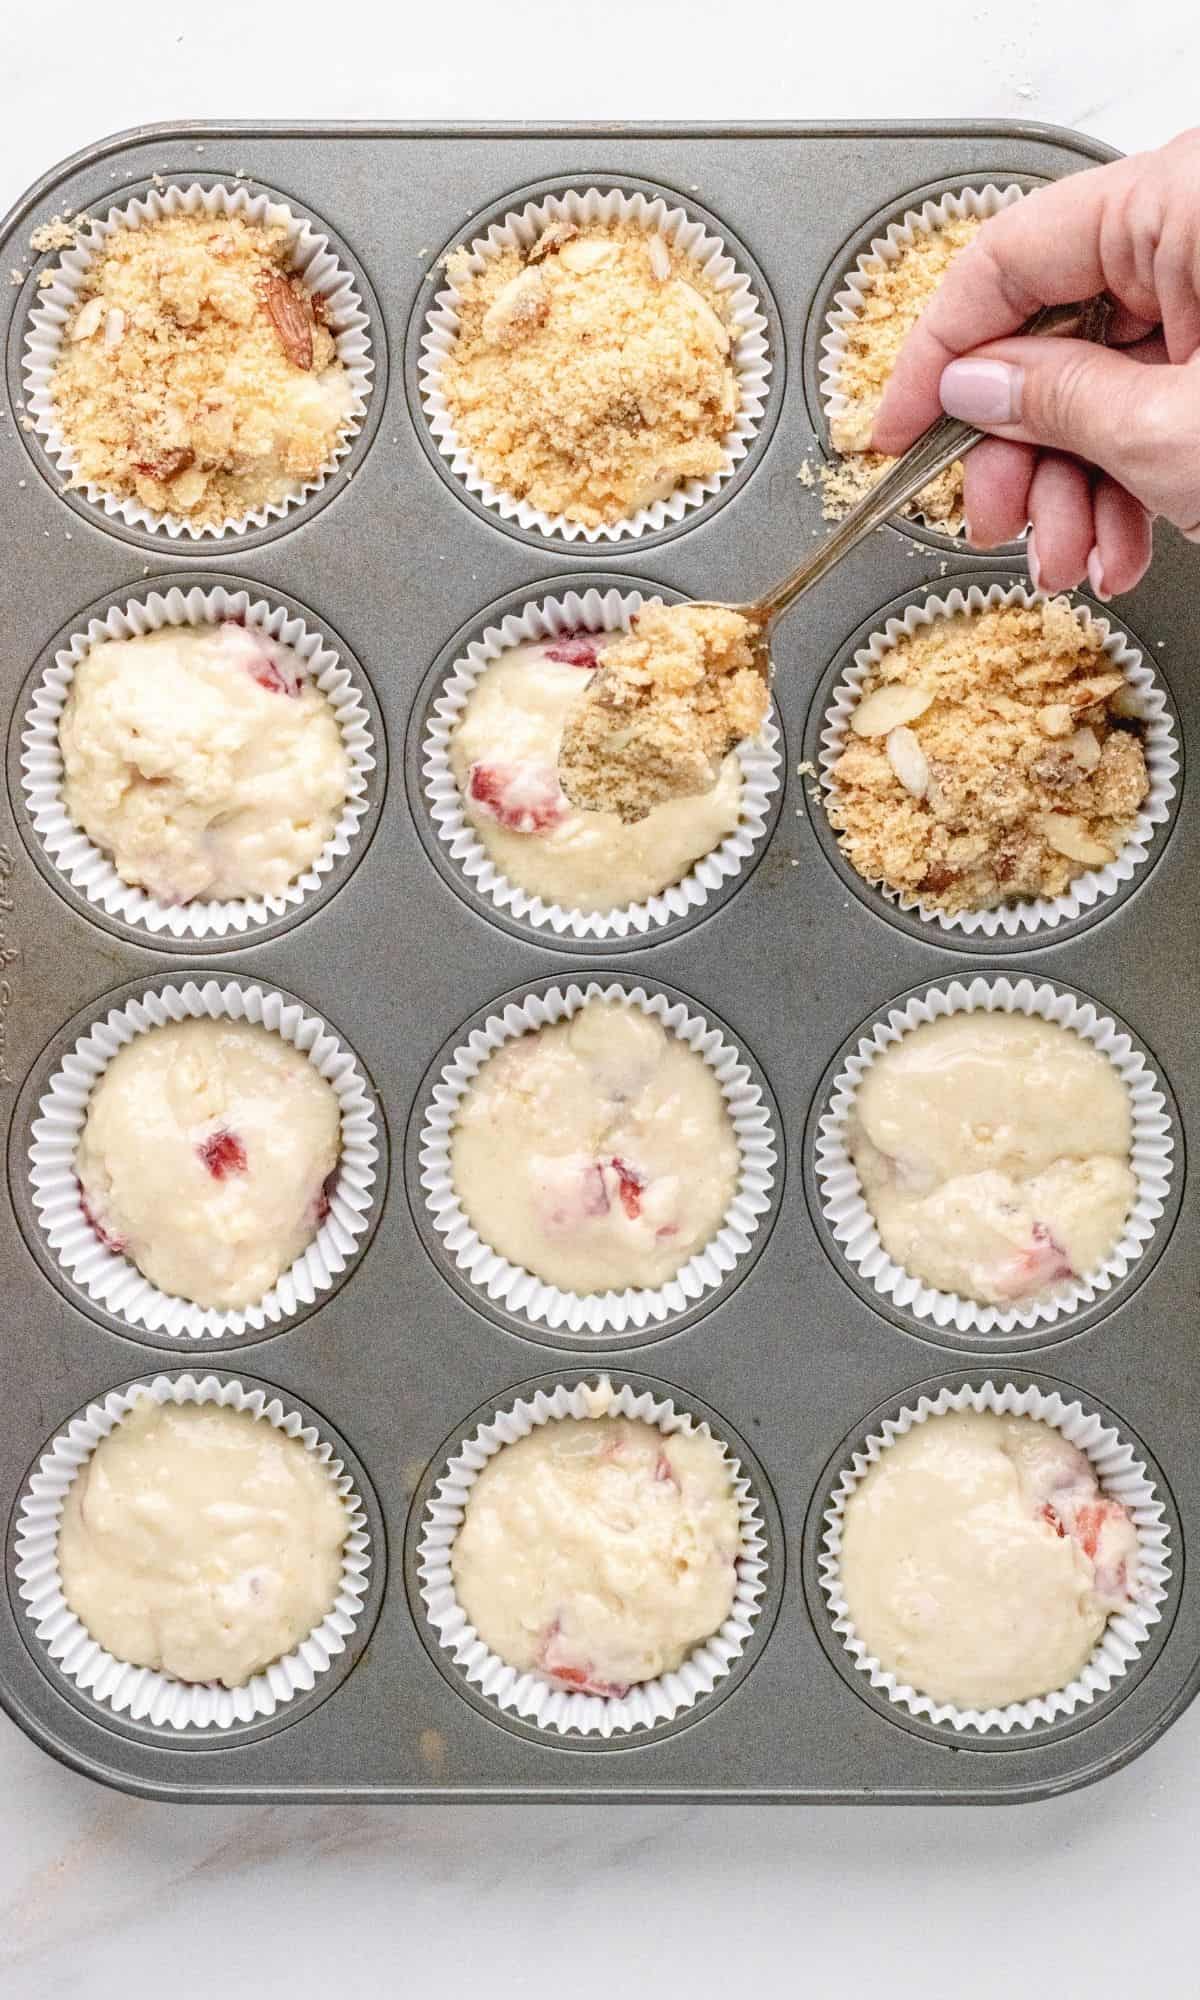 Crumb topping being spooned onto strawberry lemon muffin batter.